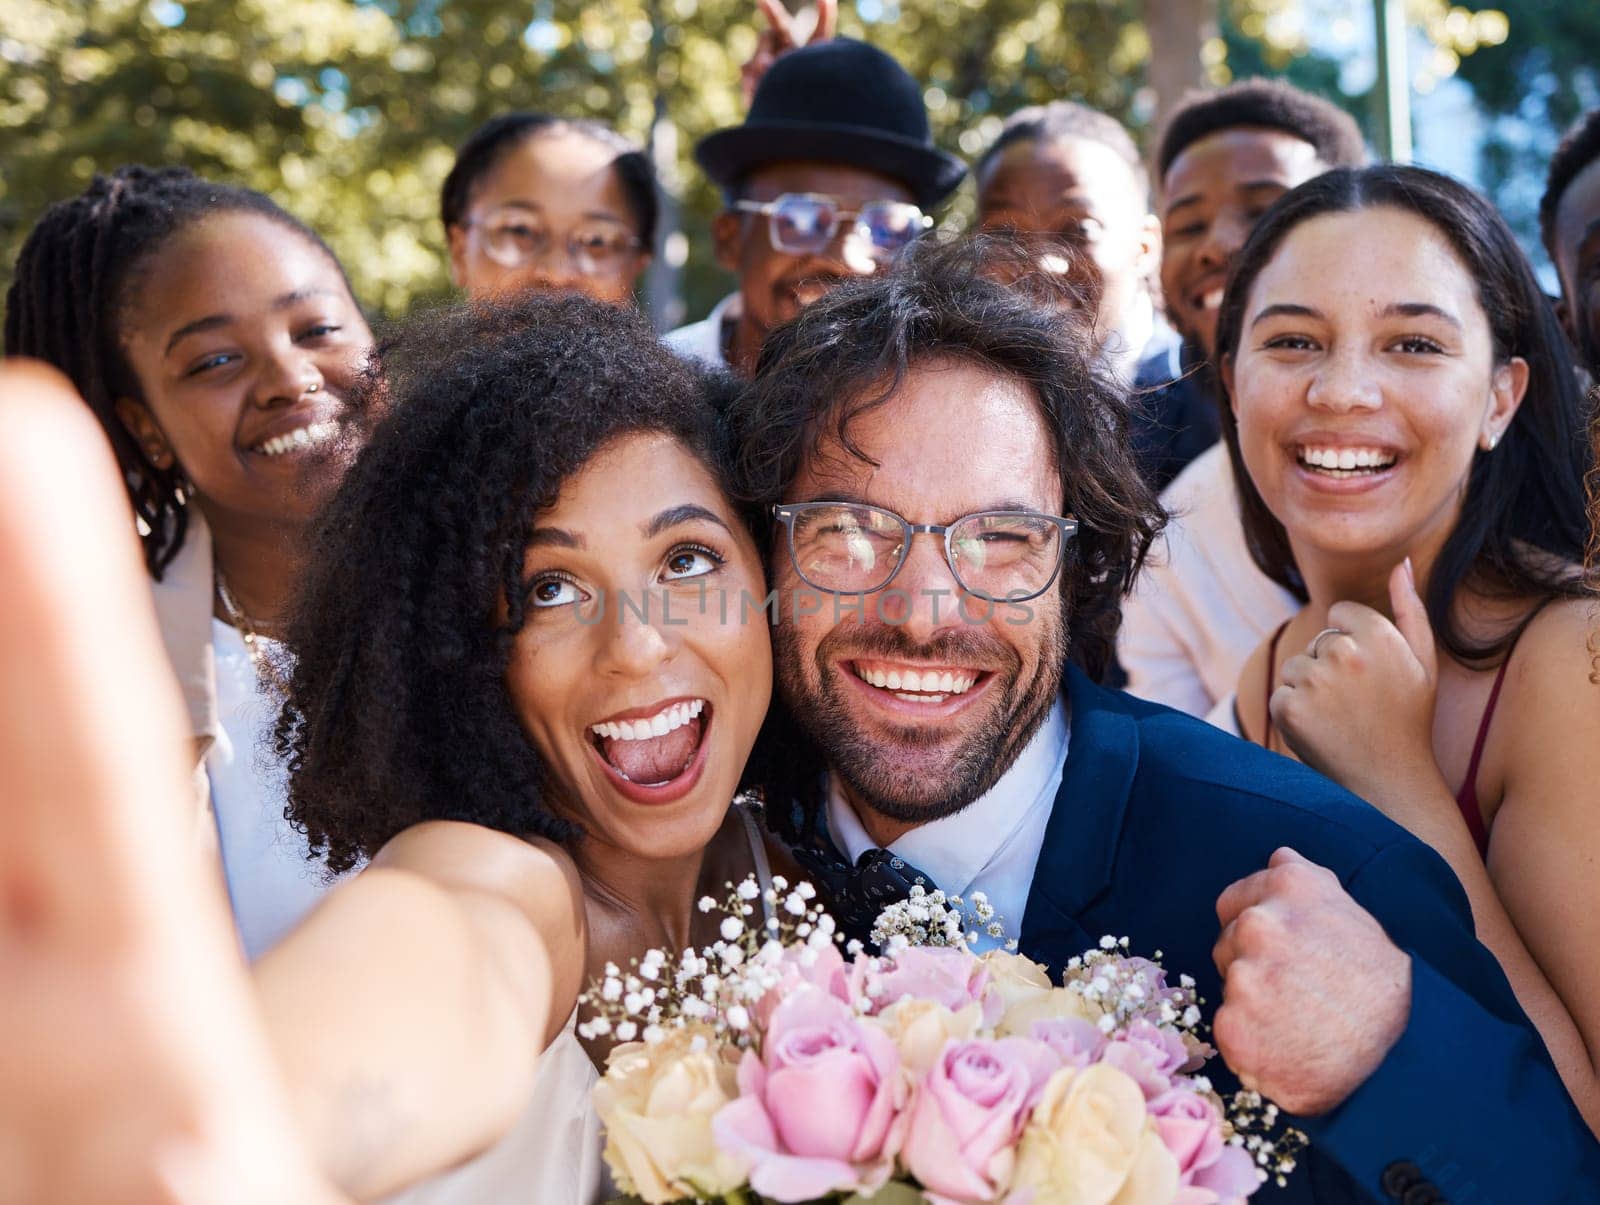 Friends, bride and groom with wedding selfie for outdoor ceremony celebration of happiness, love and joy. Marriage, happy and interracial relationship photograph of togetherness with excited guests by YuriArcurs